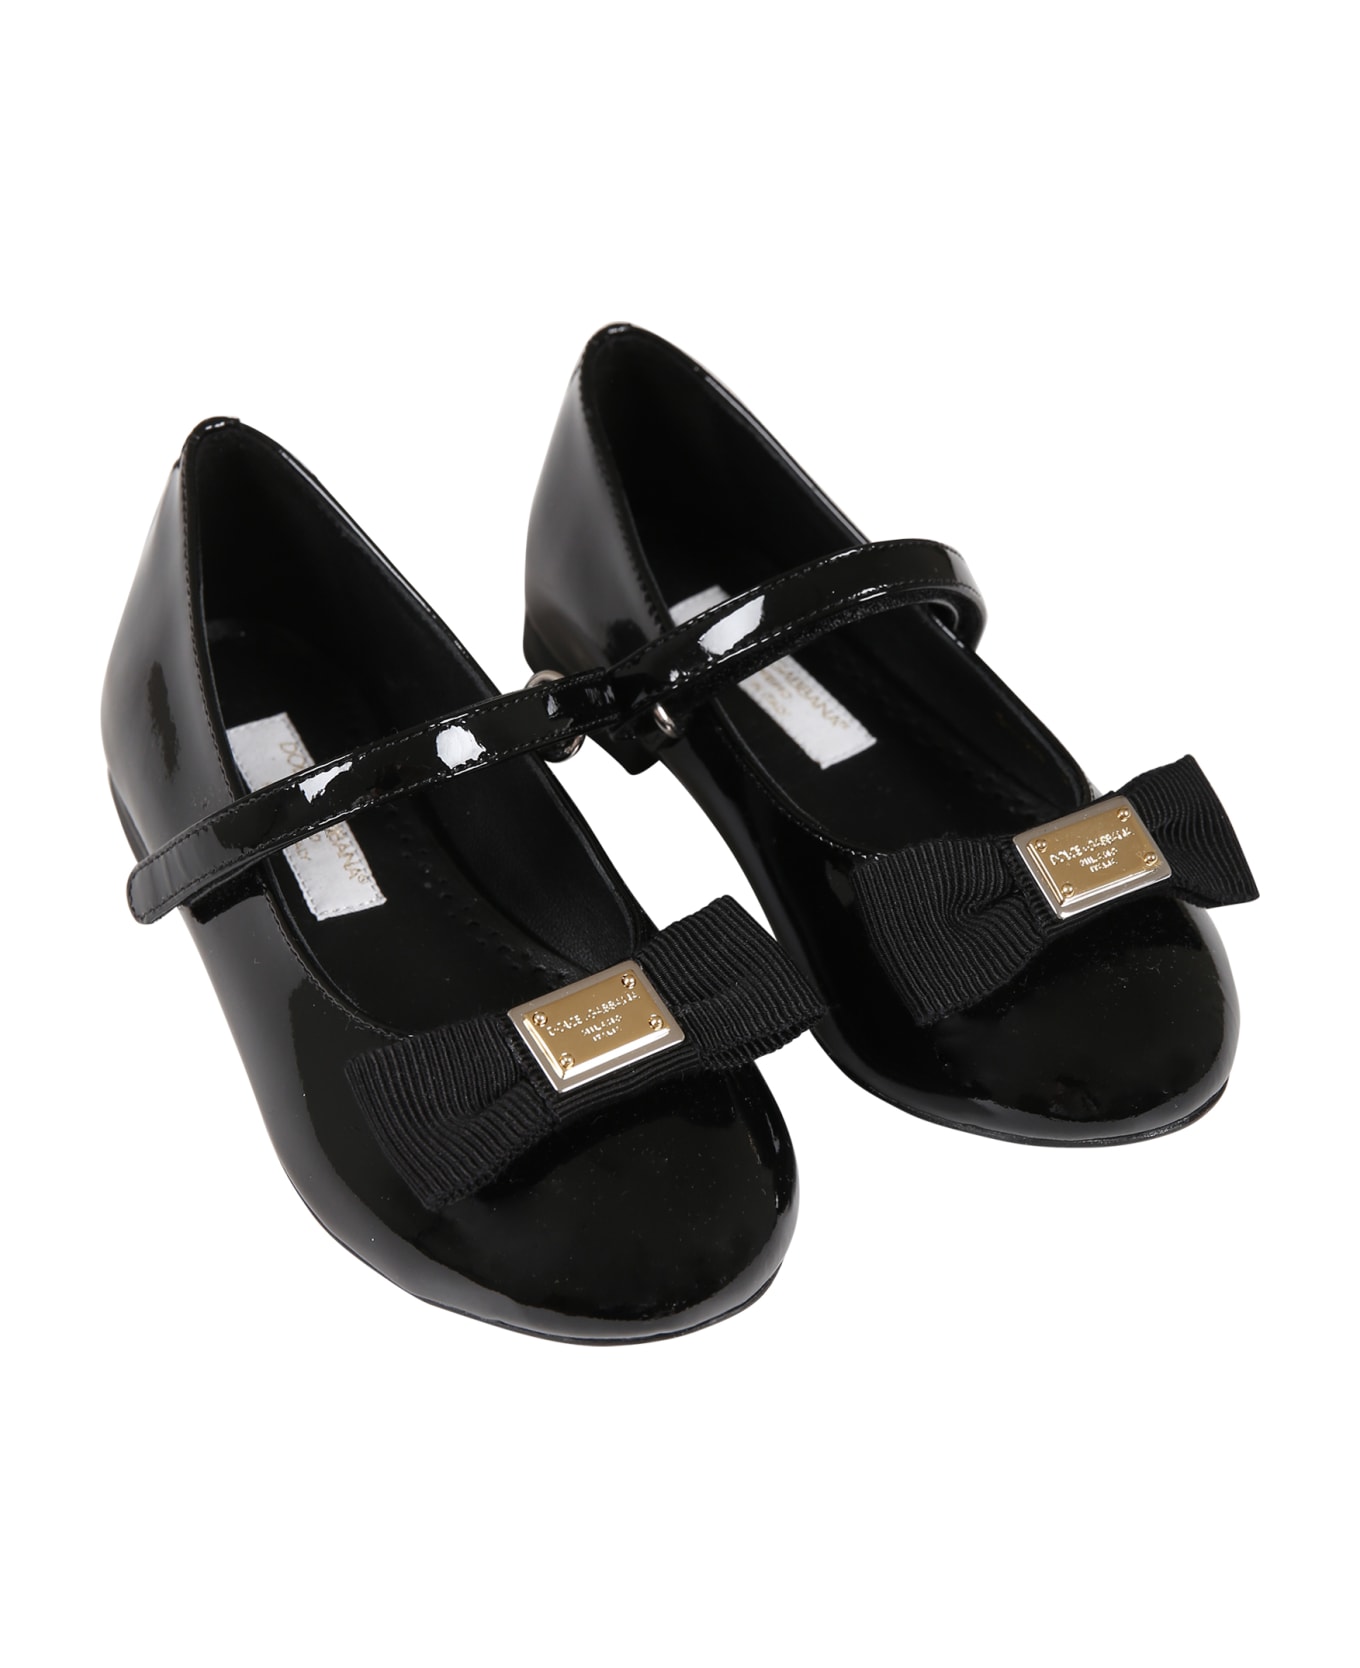 Dolce & Gabbana Black Ballet Flats For Girl With Logo And Bow - Black